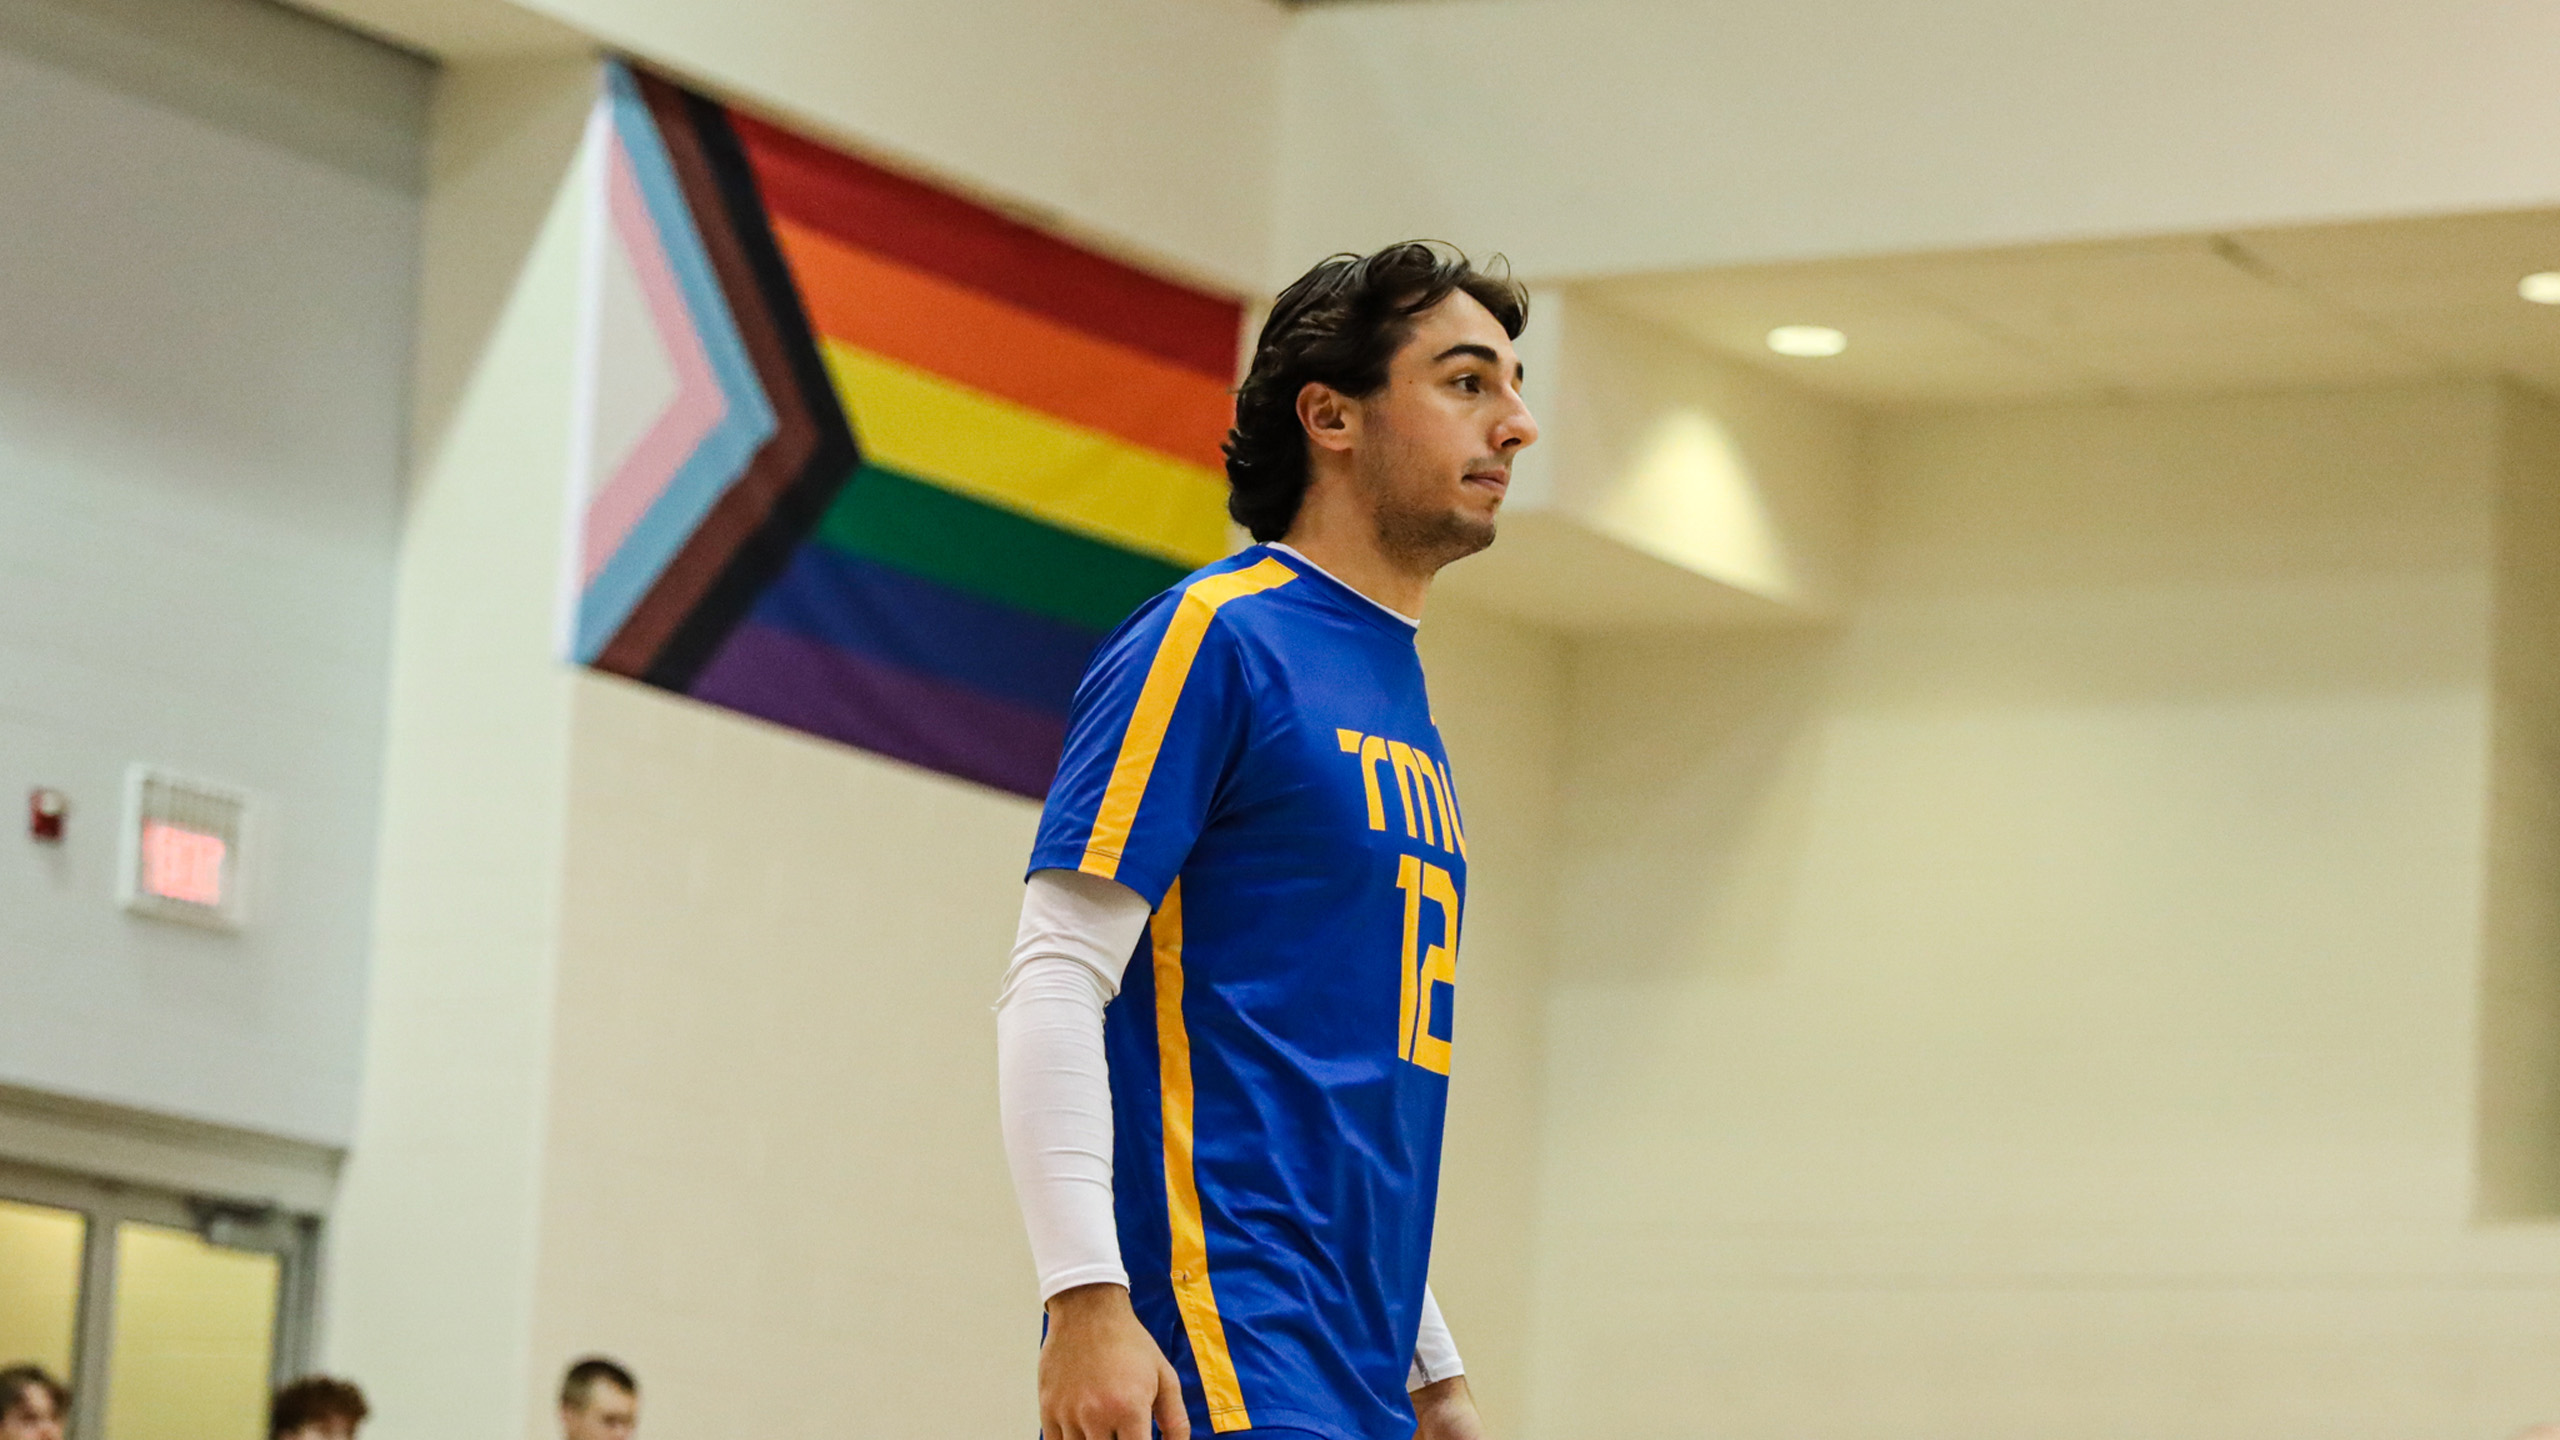 TMU men's volleyball player Tony Tanouchev stands on the court